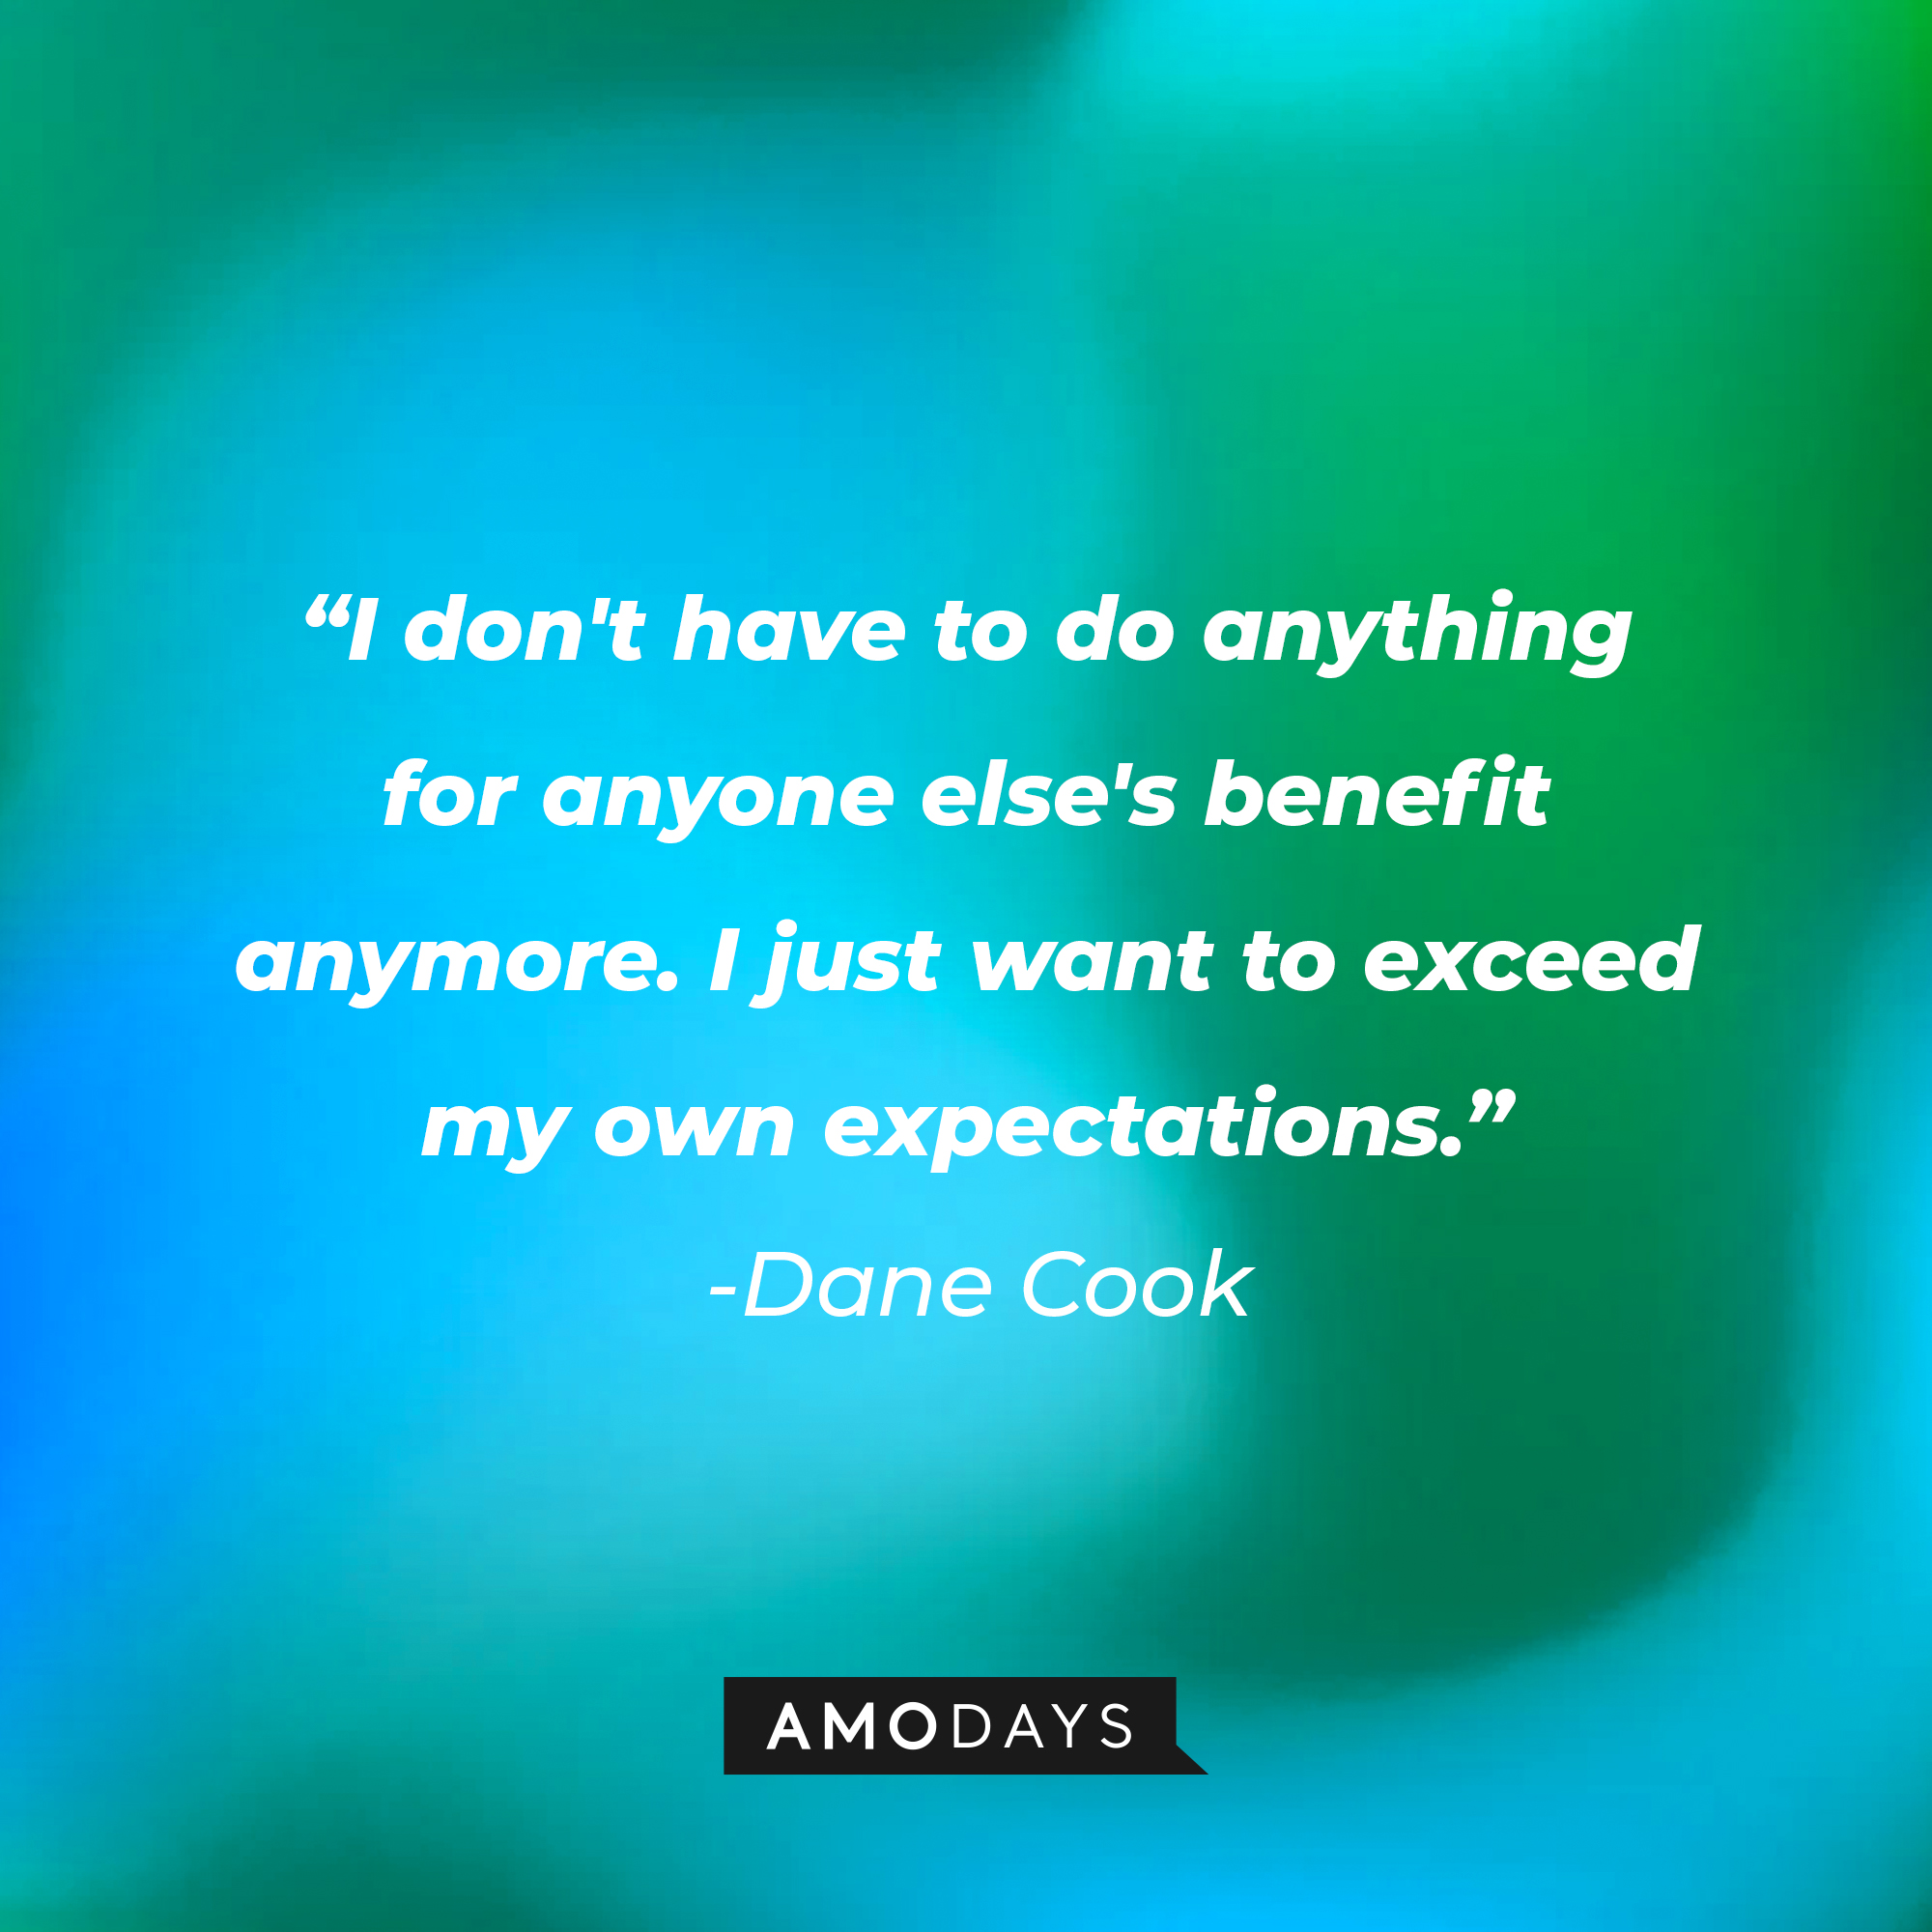 Dane Cook's quote: “I don't have to do anything for anyone else's benefit anymore. I just want to exceed my own expectations.”  | Source: Amodays